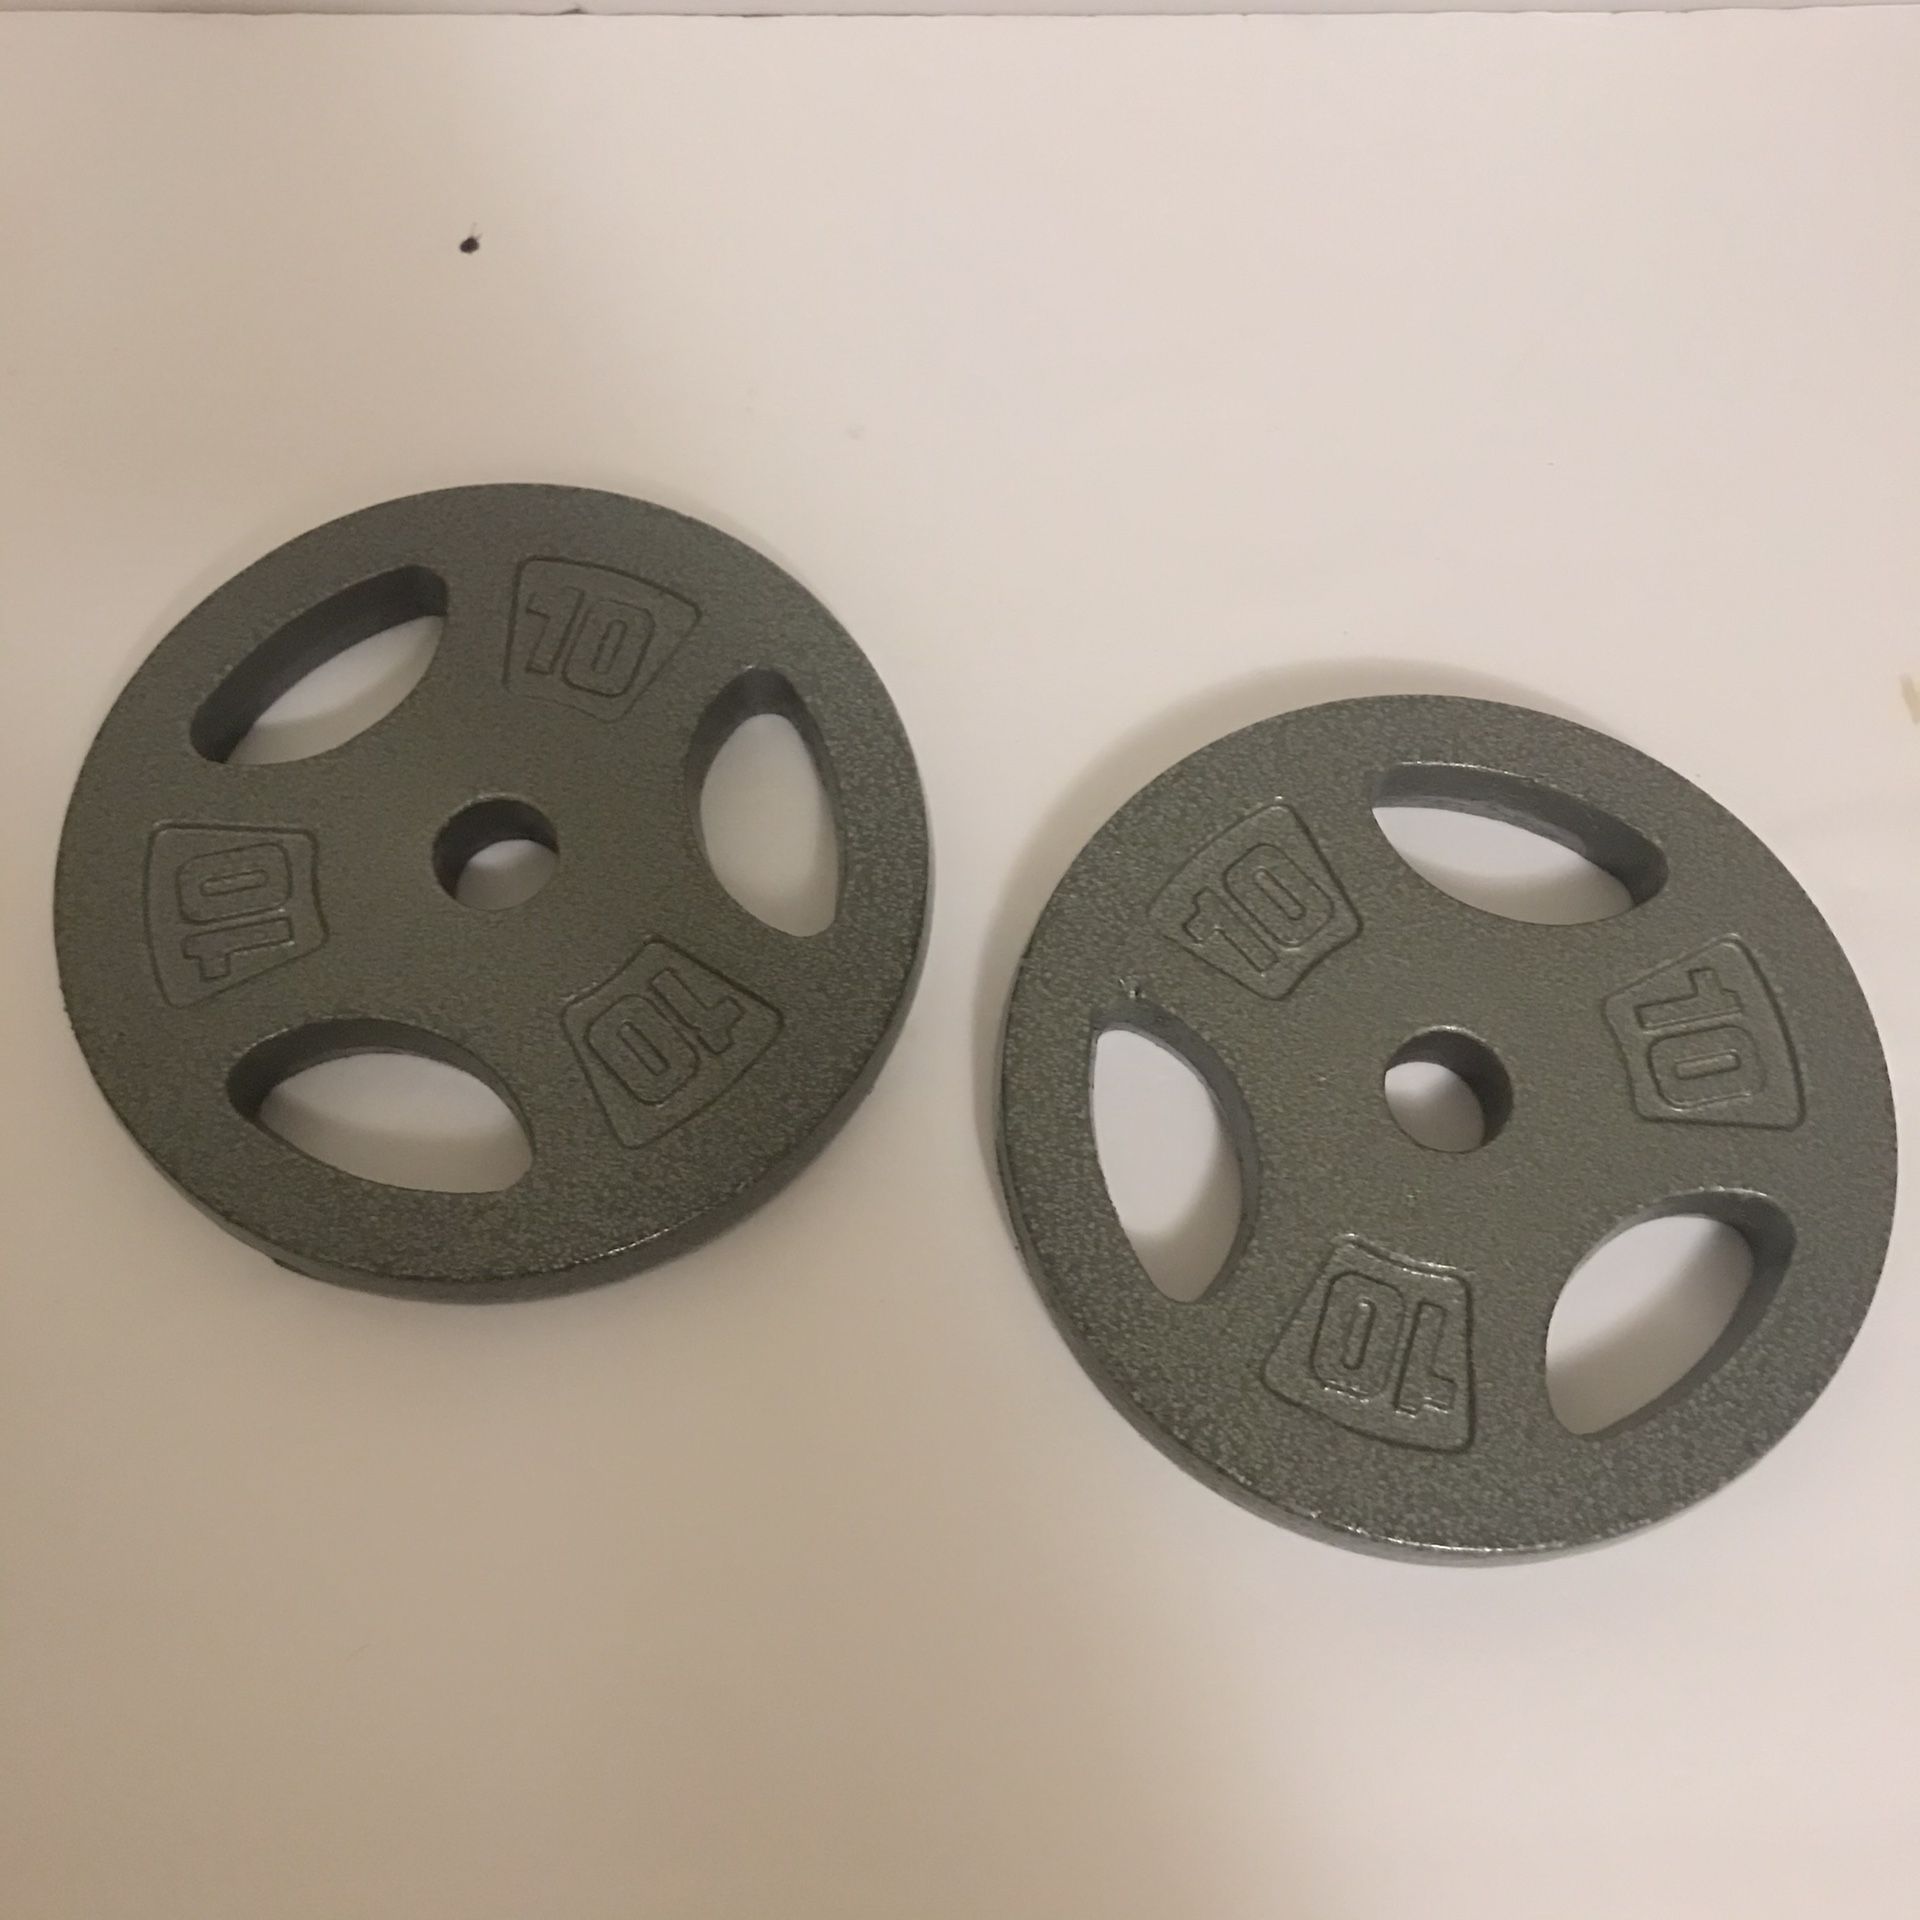 LOT of TWO- 10-pound CAP 1" STANDARD barbell dumbbell Weight Plates 20 lb TOTAL